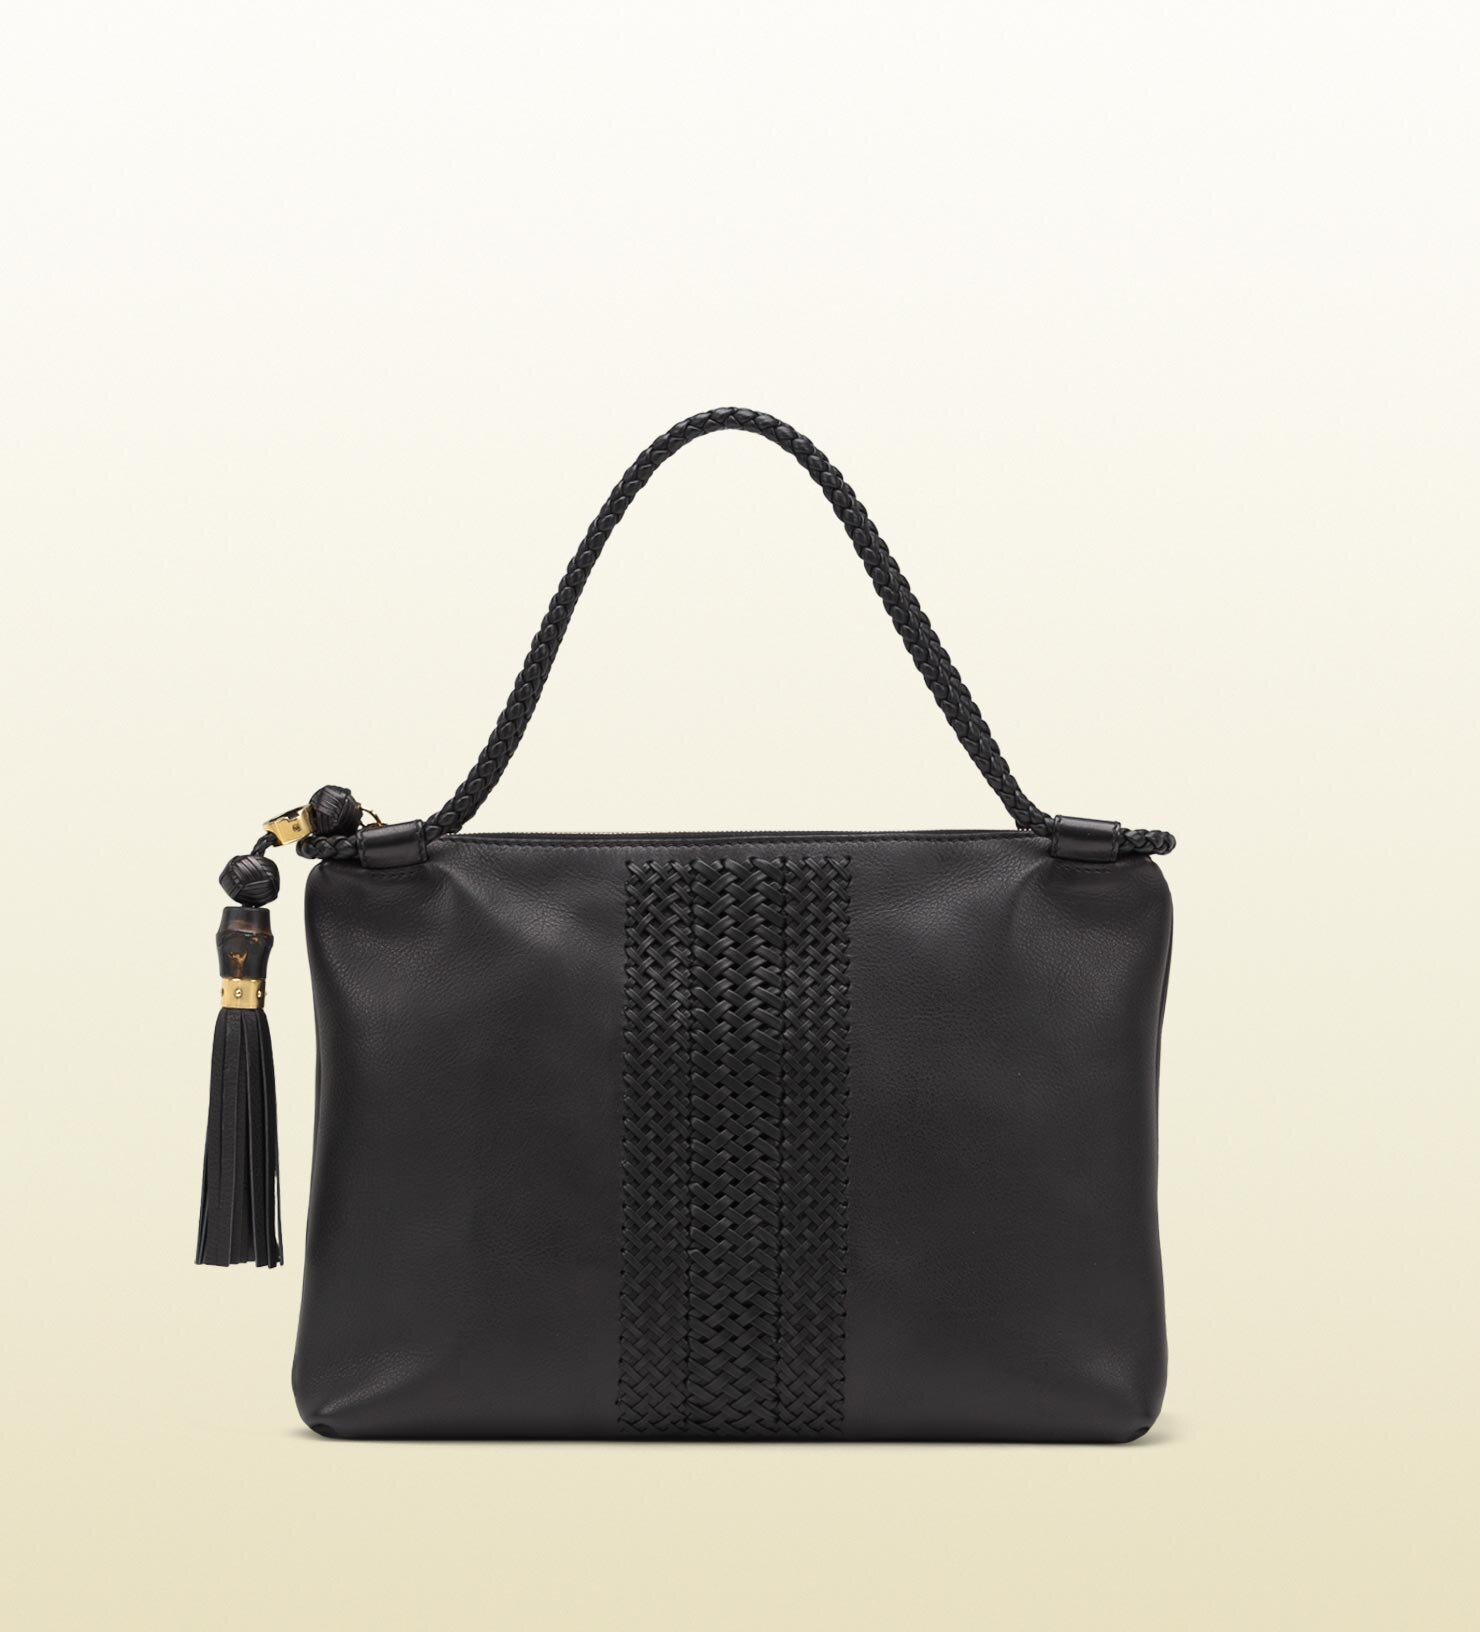 Gucci Handmade Medium Shoulder Bag with Woven Web Detail in Black Leather.jpg